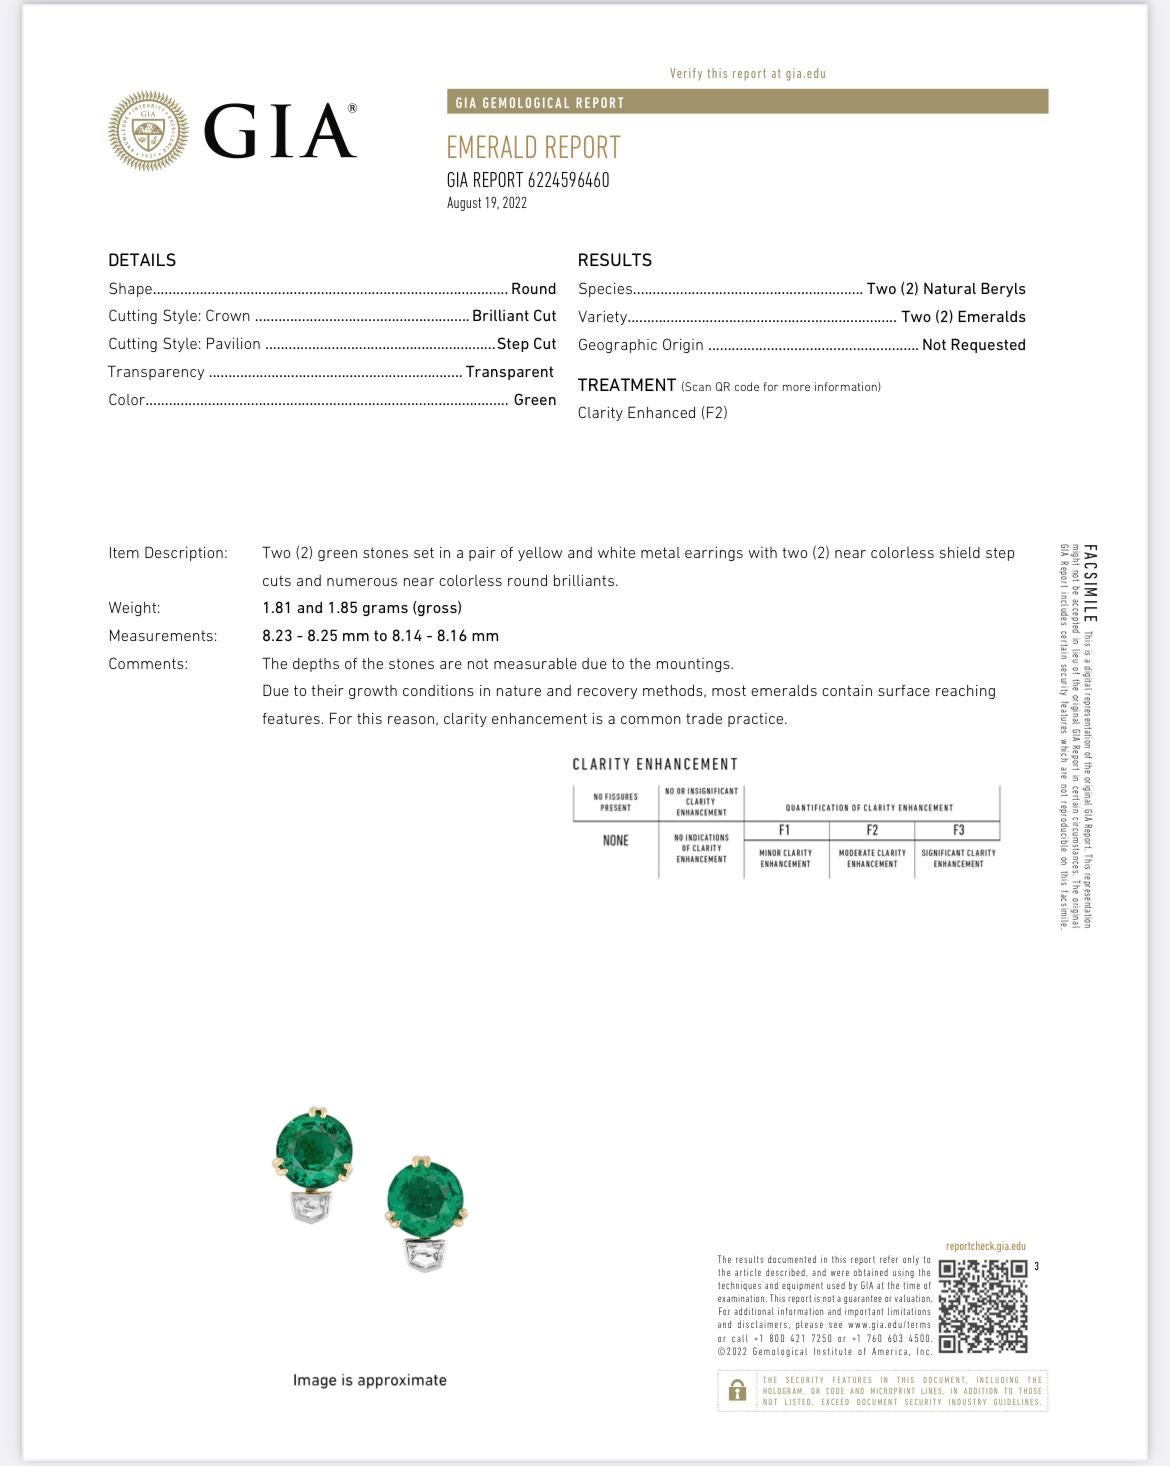 A pair of exceptional emeralds, weighing 4.08 carats, exudes timeless elegance in these verdant 18K yellow with white gold earrings. Accented by two cadillac-cut diamonds 0.35ct and round brilliant-cut diamonds totaling 0.12ct. Earrings are